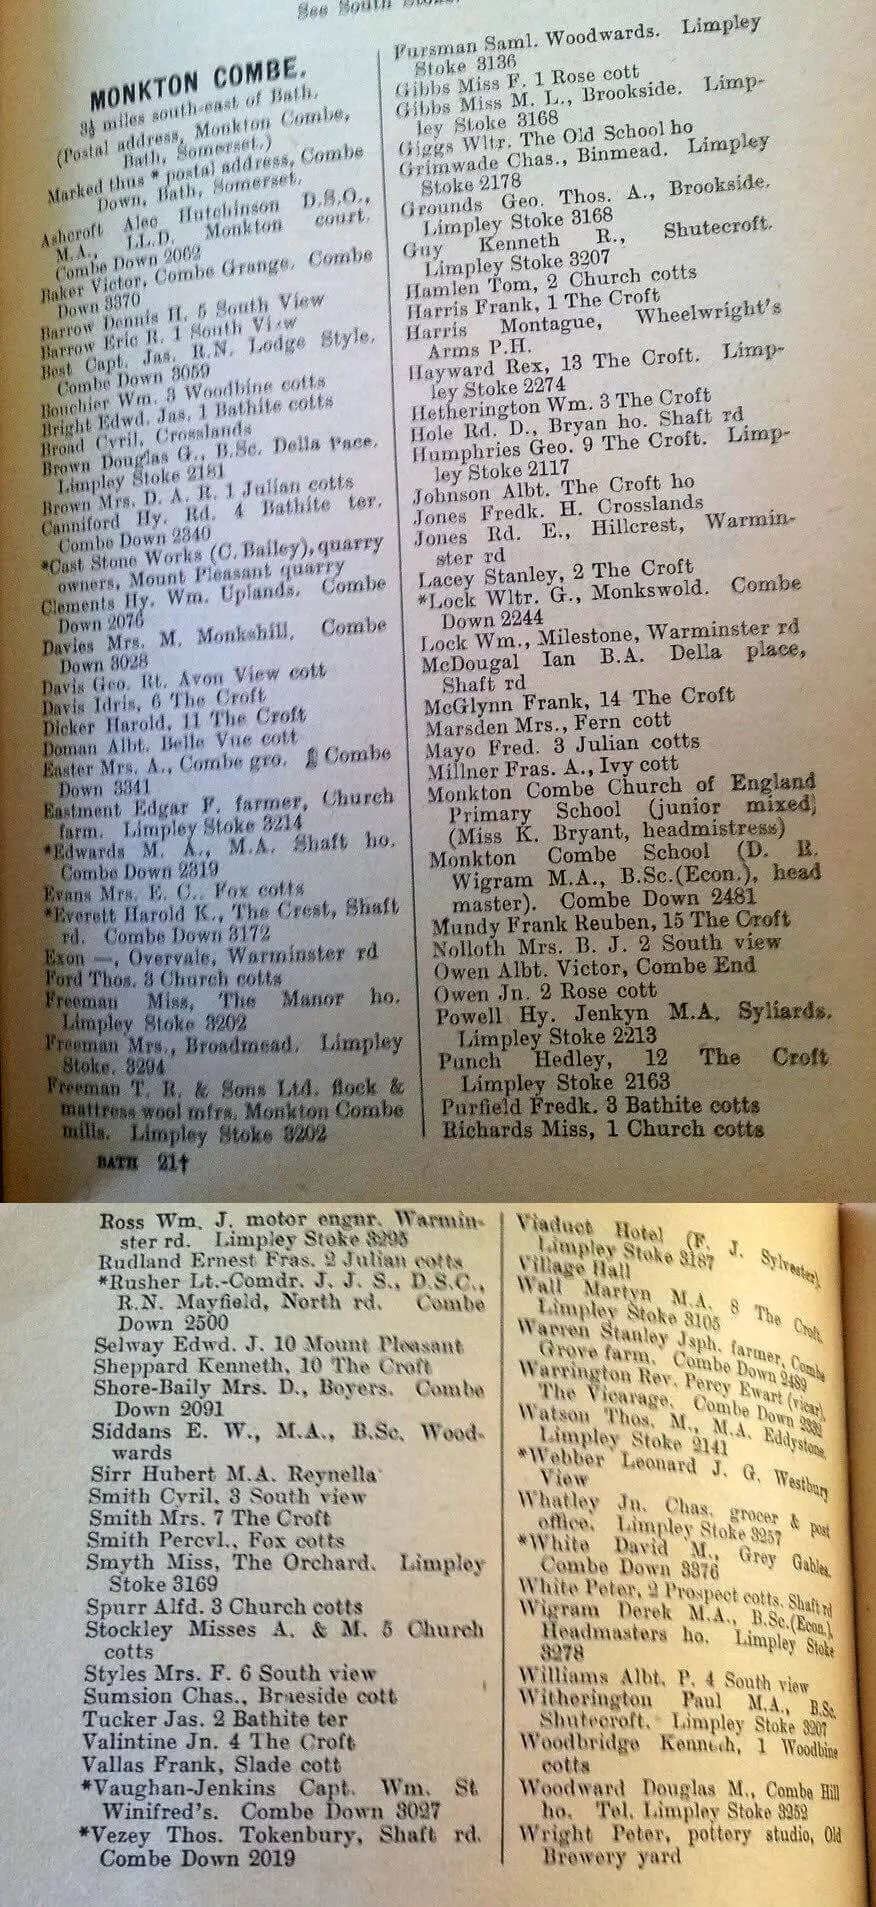 1955 post office directory for monkton combe